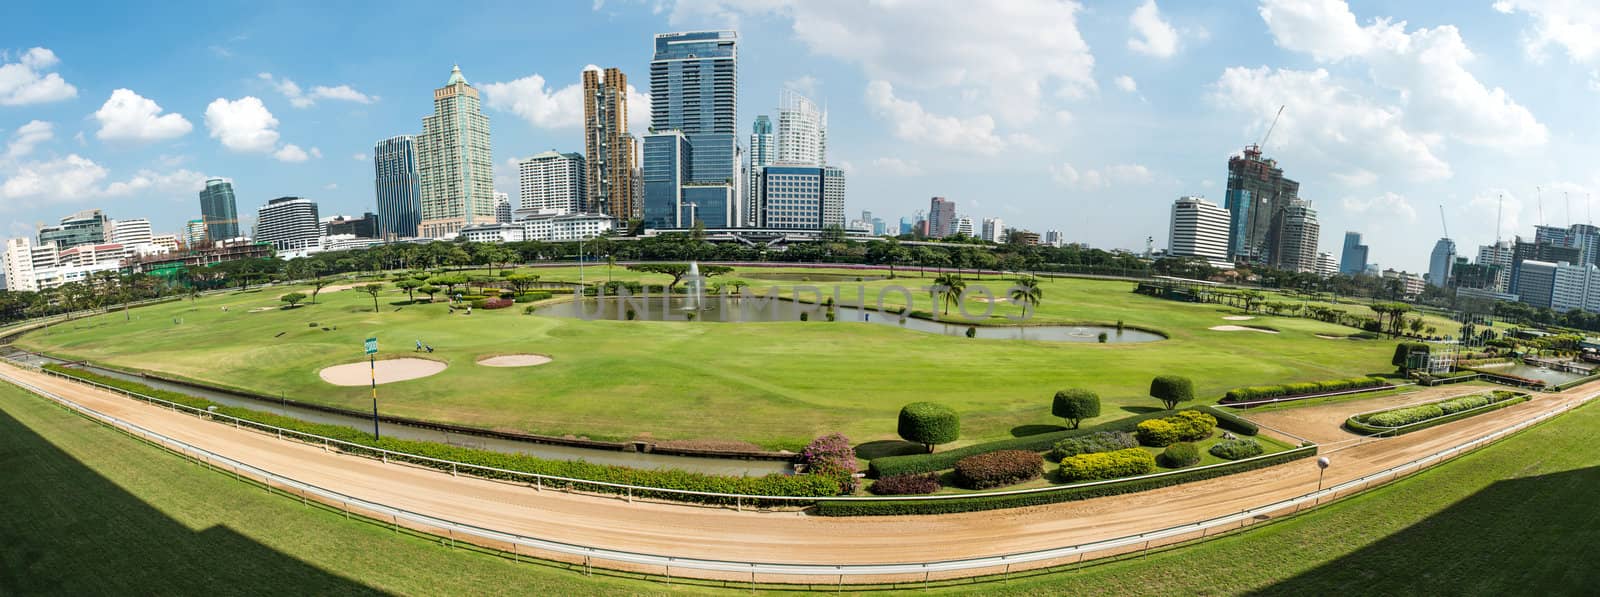 Golf course in the city of Bangkok taken in panoramic technic, on a sunny day